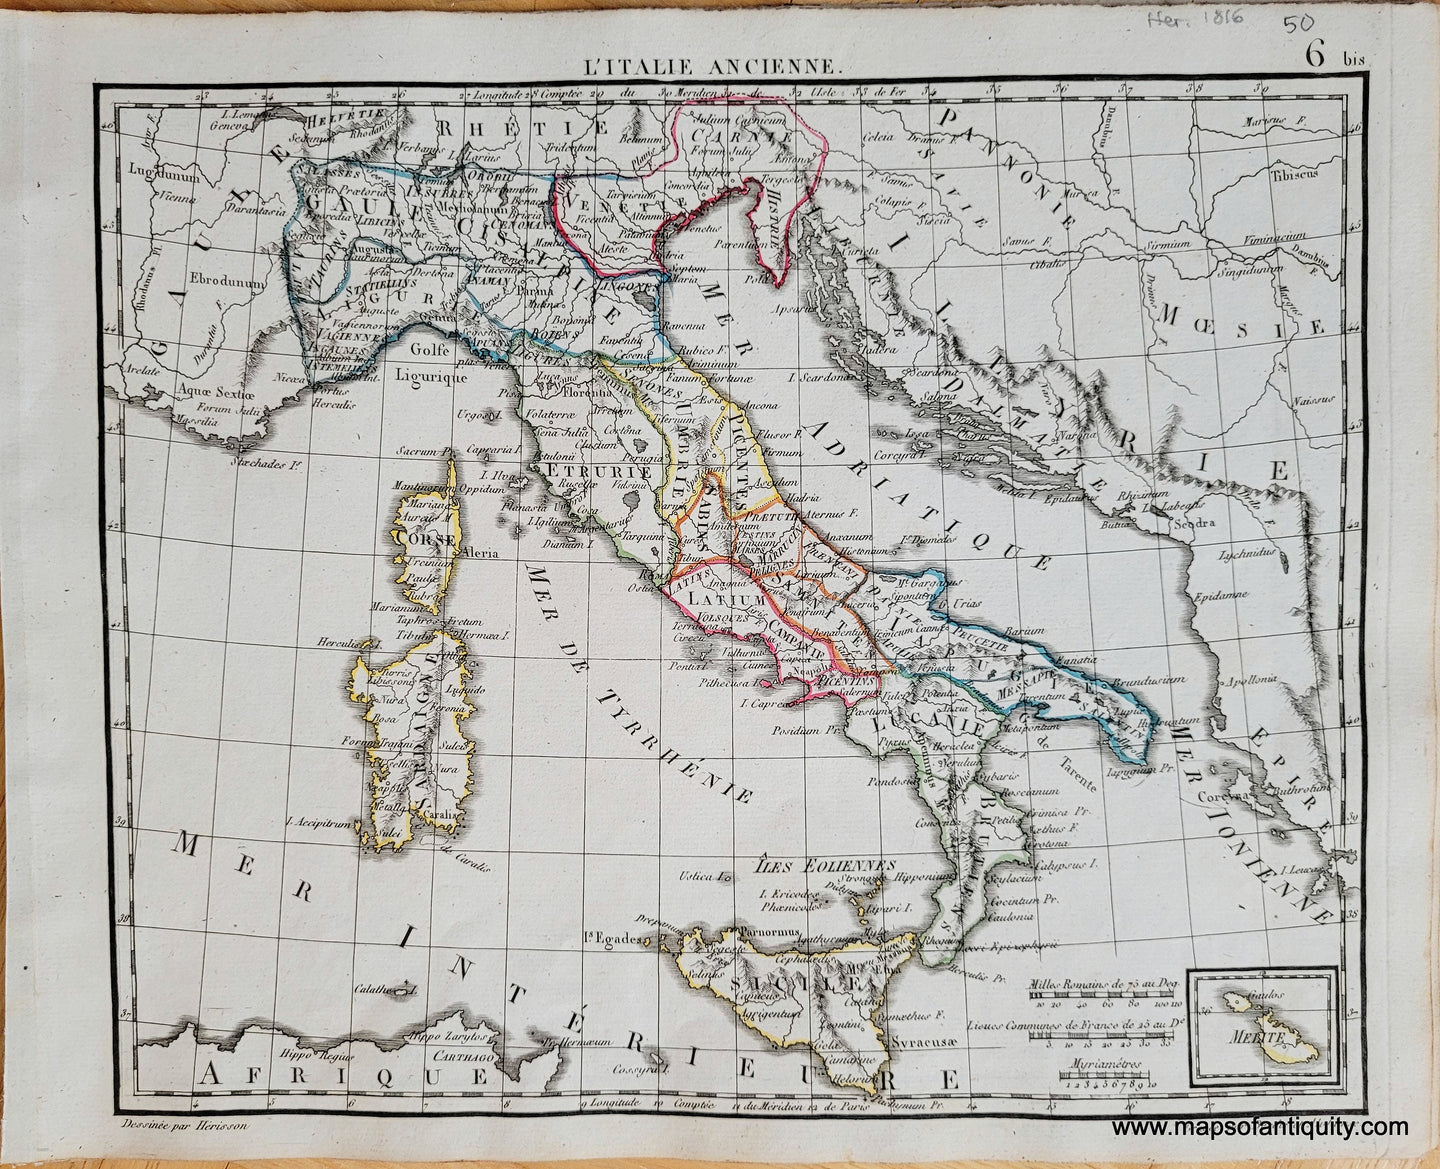 Genuine-Antique-Map-Italy-LItalie-Ancienne-Italy-1816-Herisson-Maps-Of-Antiquity-1800s-19th-century